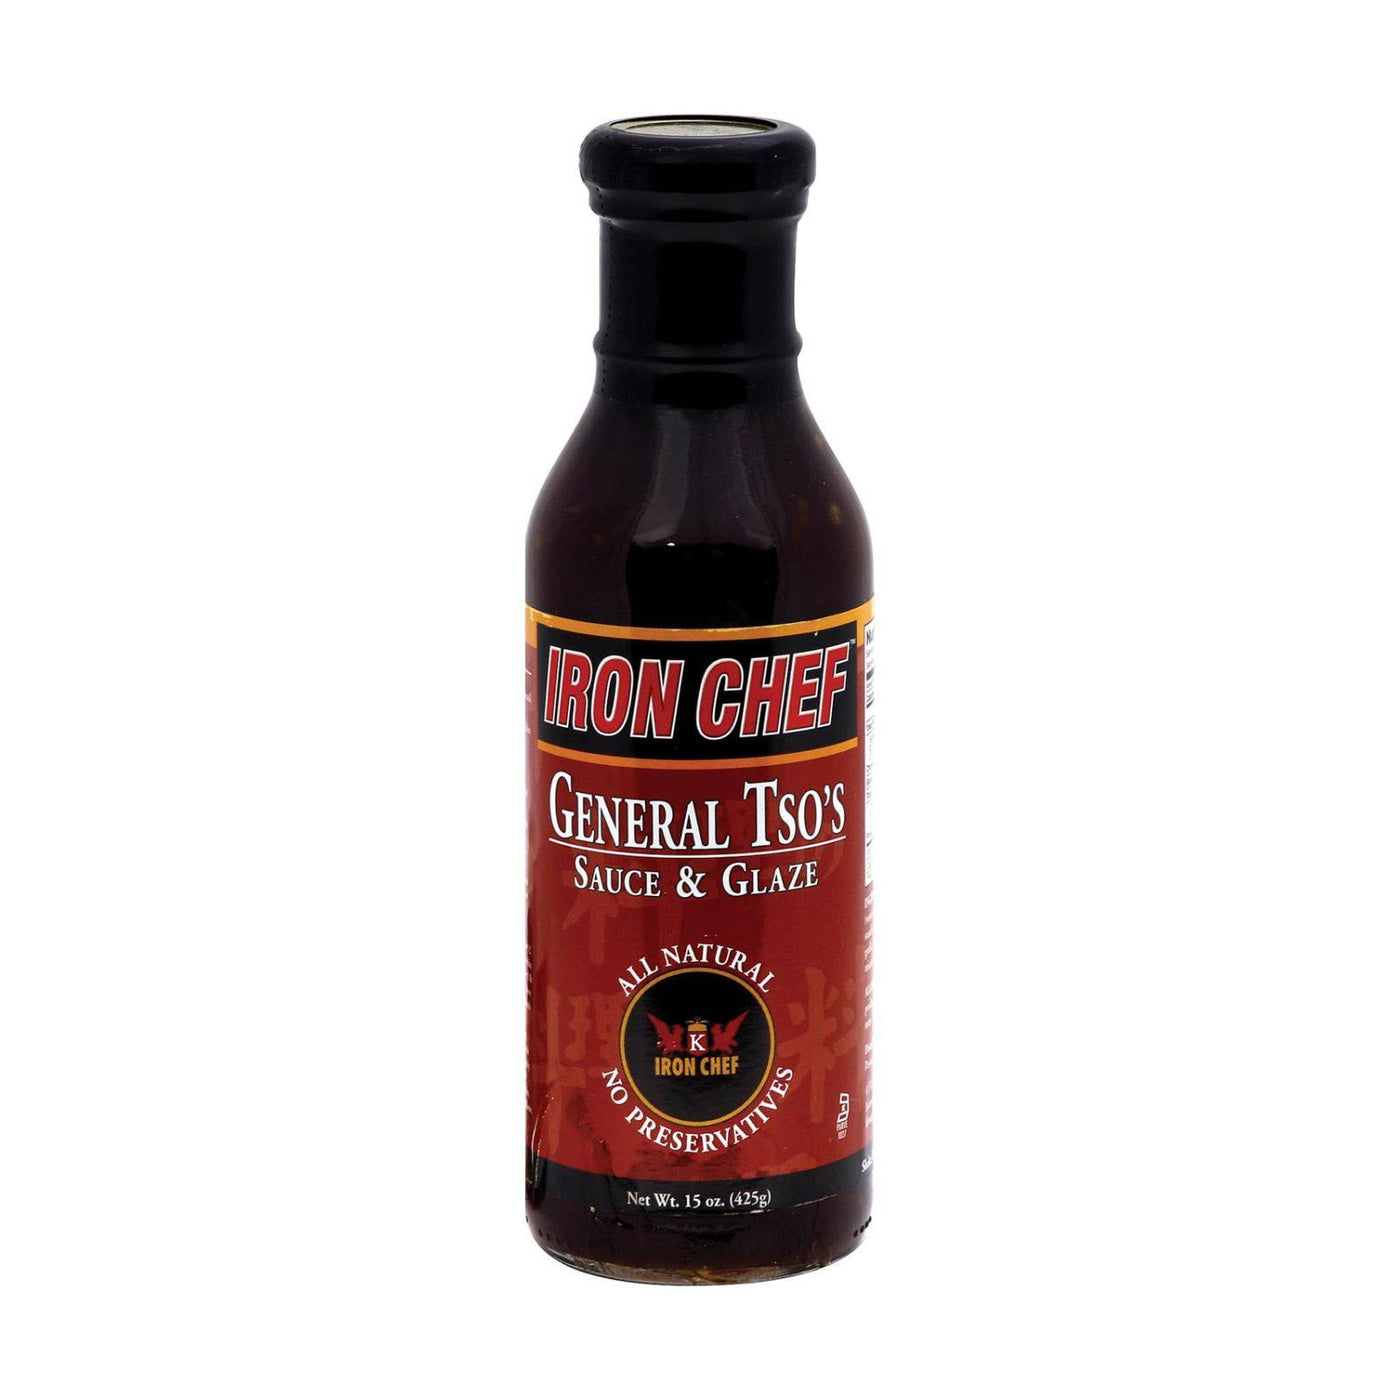 Buy Iron Chef Sauce And Glaze - General Tso's - Case Of 6 - 15 Oz.  at OnlyNaturals.us